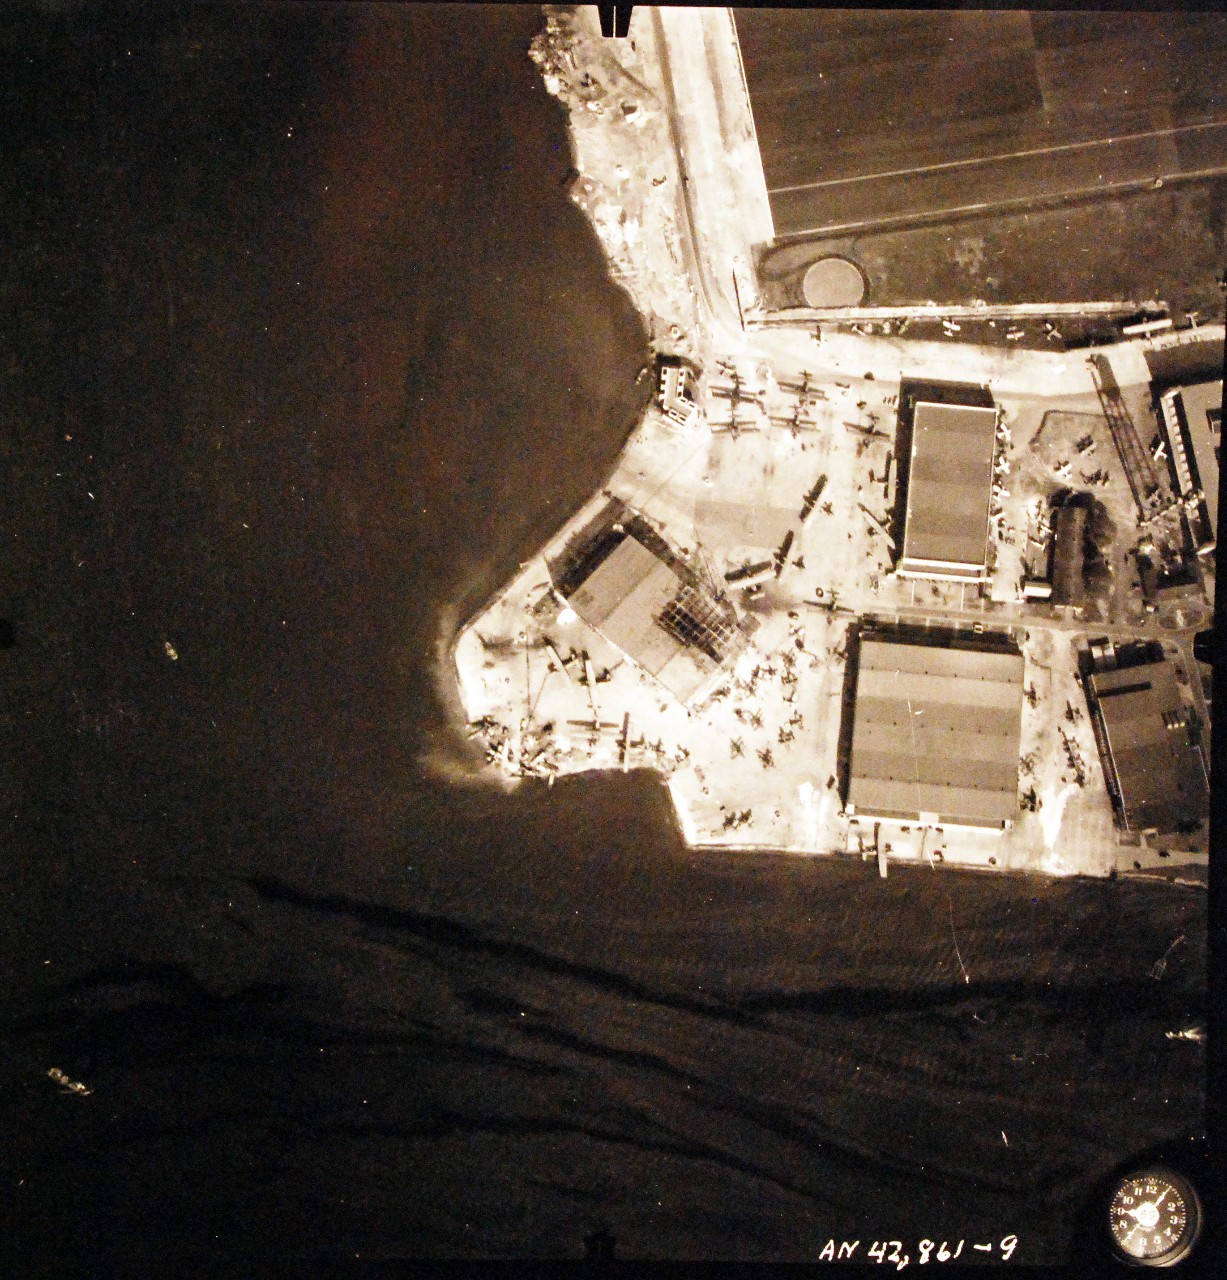 80-G-387570:  Pearl Harbor Attack, 7 December 1941.  Aerial view of Naval Air Station Ford Island taken three days after the attack on 10 December.  Photographed by VJ-1 at an altitude of 3,000 feet and released November 9, 1950.  U.S. Navy photograph, now in the collections of the National Archive.  s (9/22/2015).